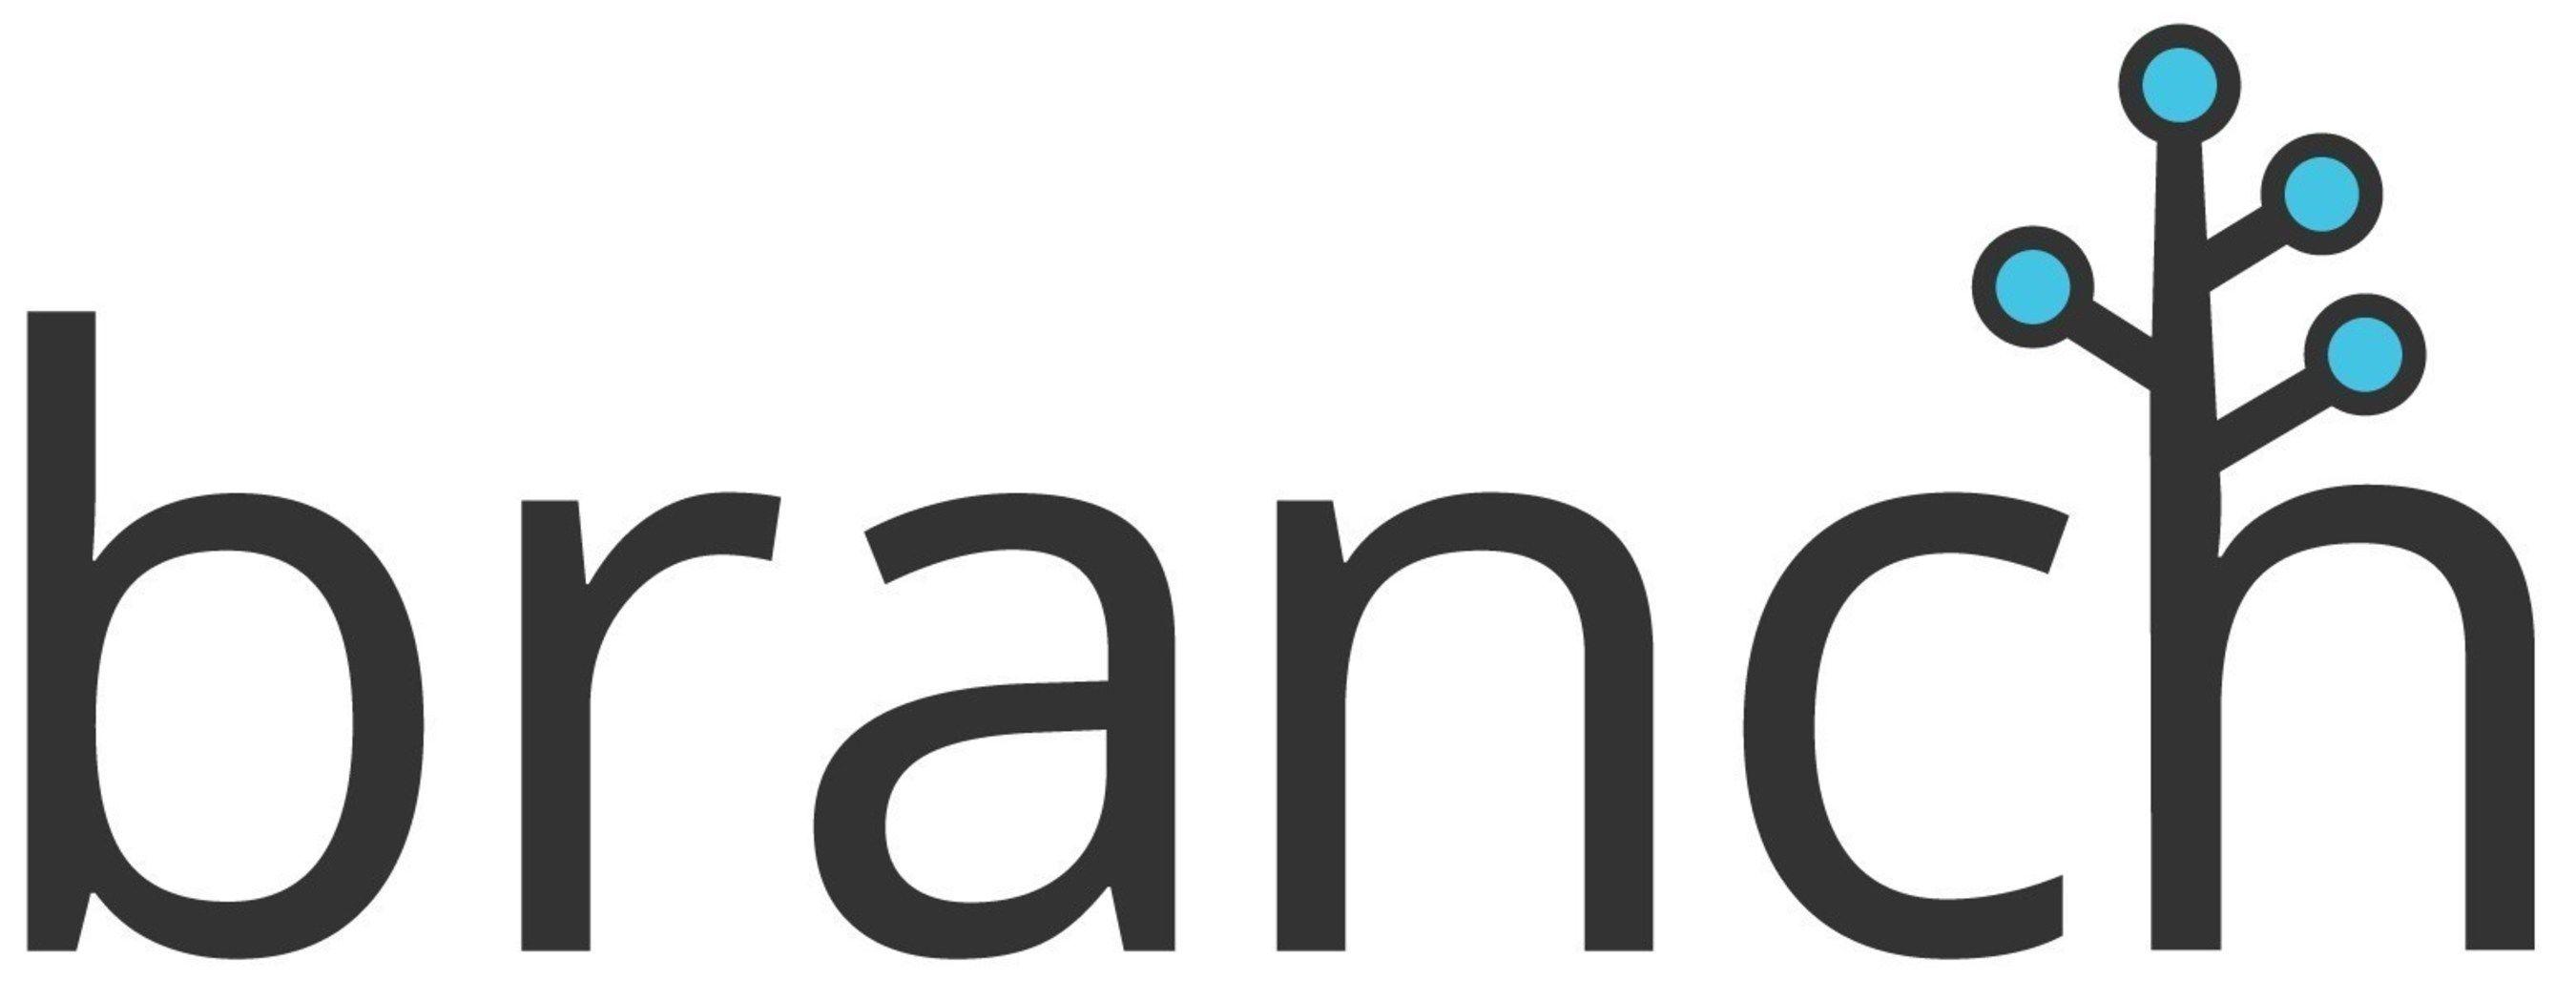 Branch.io Logo - Branch Metrics Raises $35 Million as it Becomes the Mobile Industry